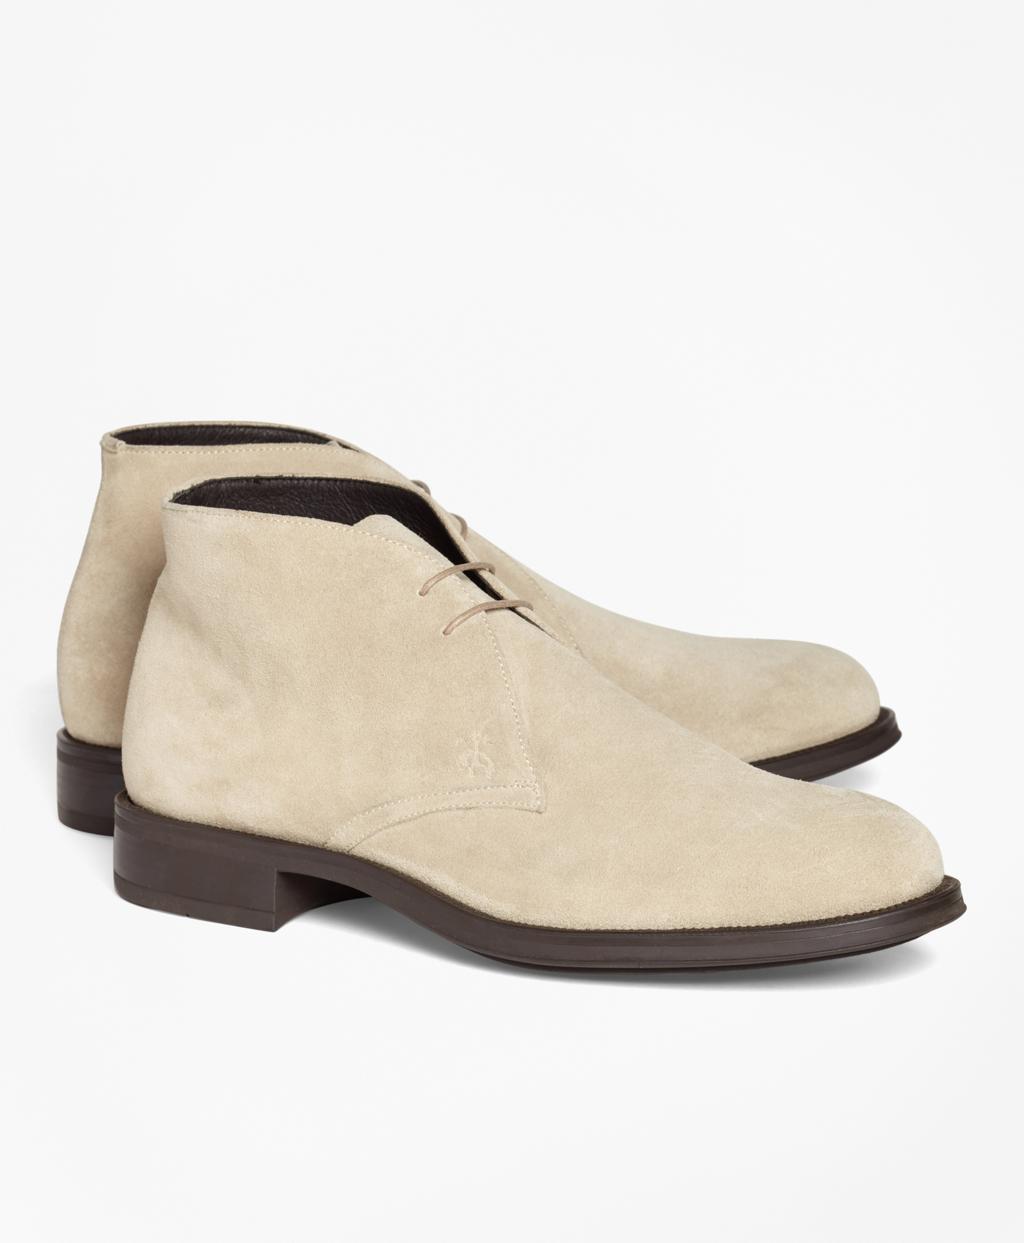 Brooks Brothers 1818 Footwear Suede Chukka Boots in Beige (Natural) for ...